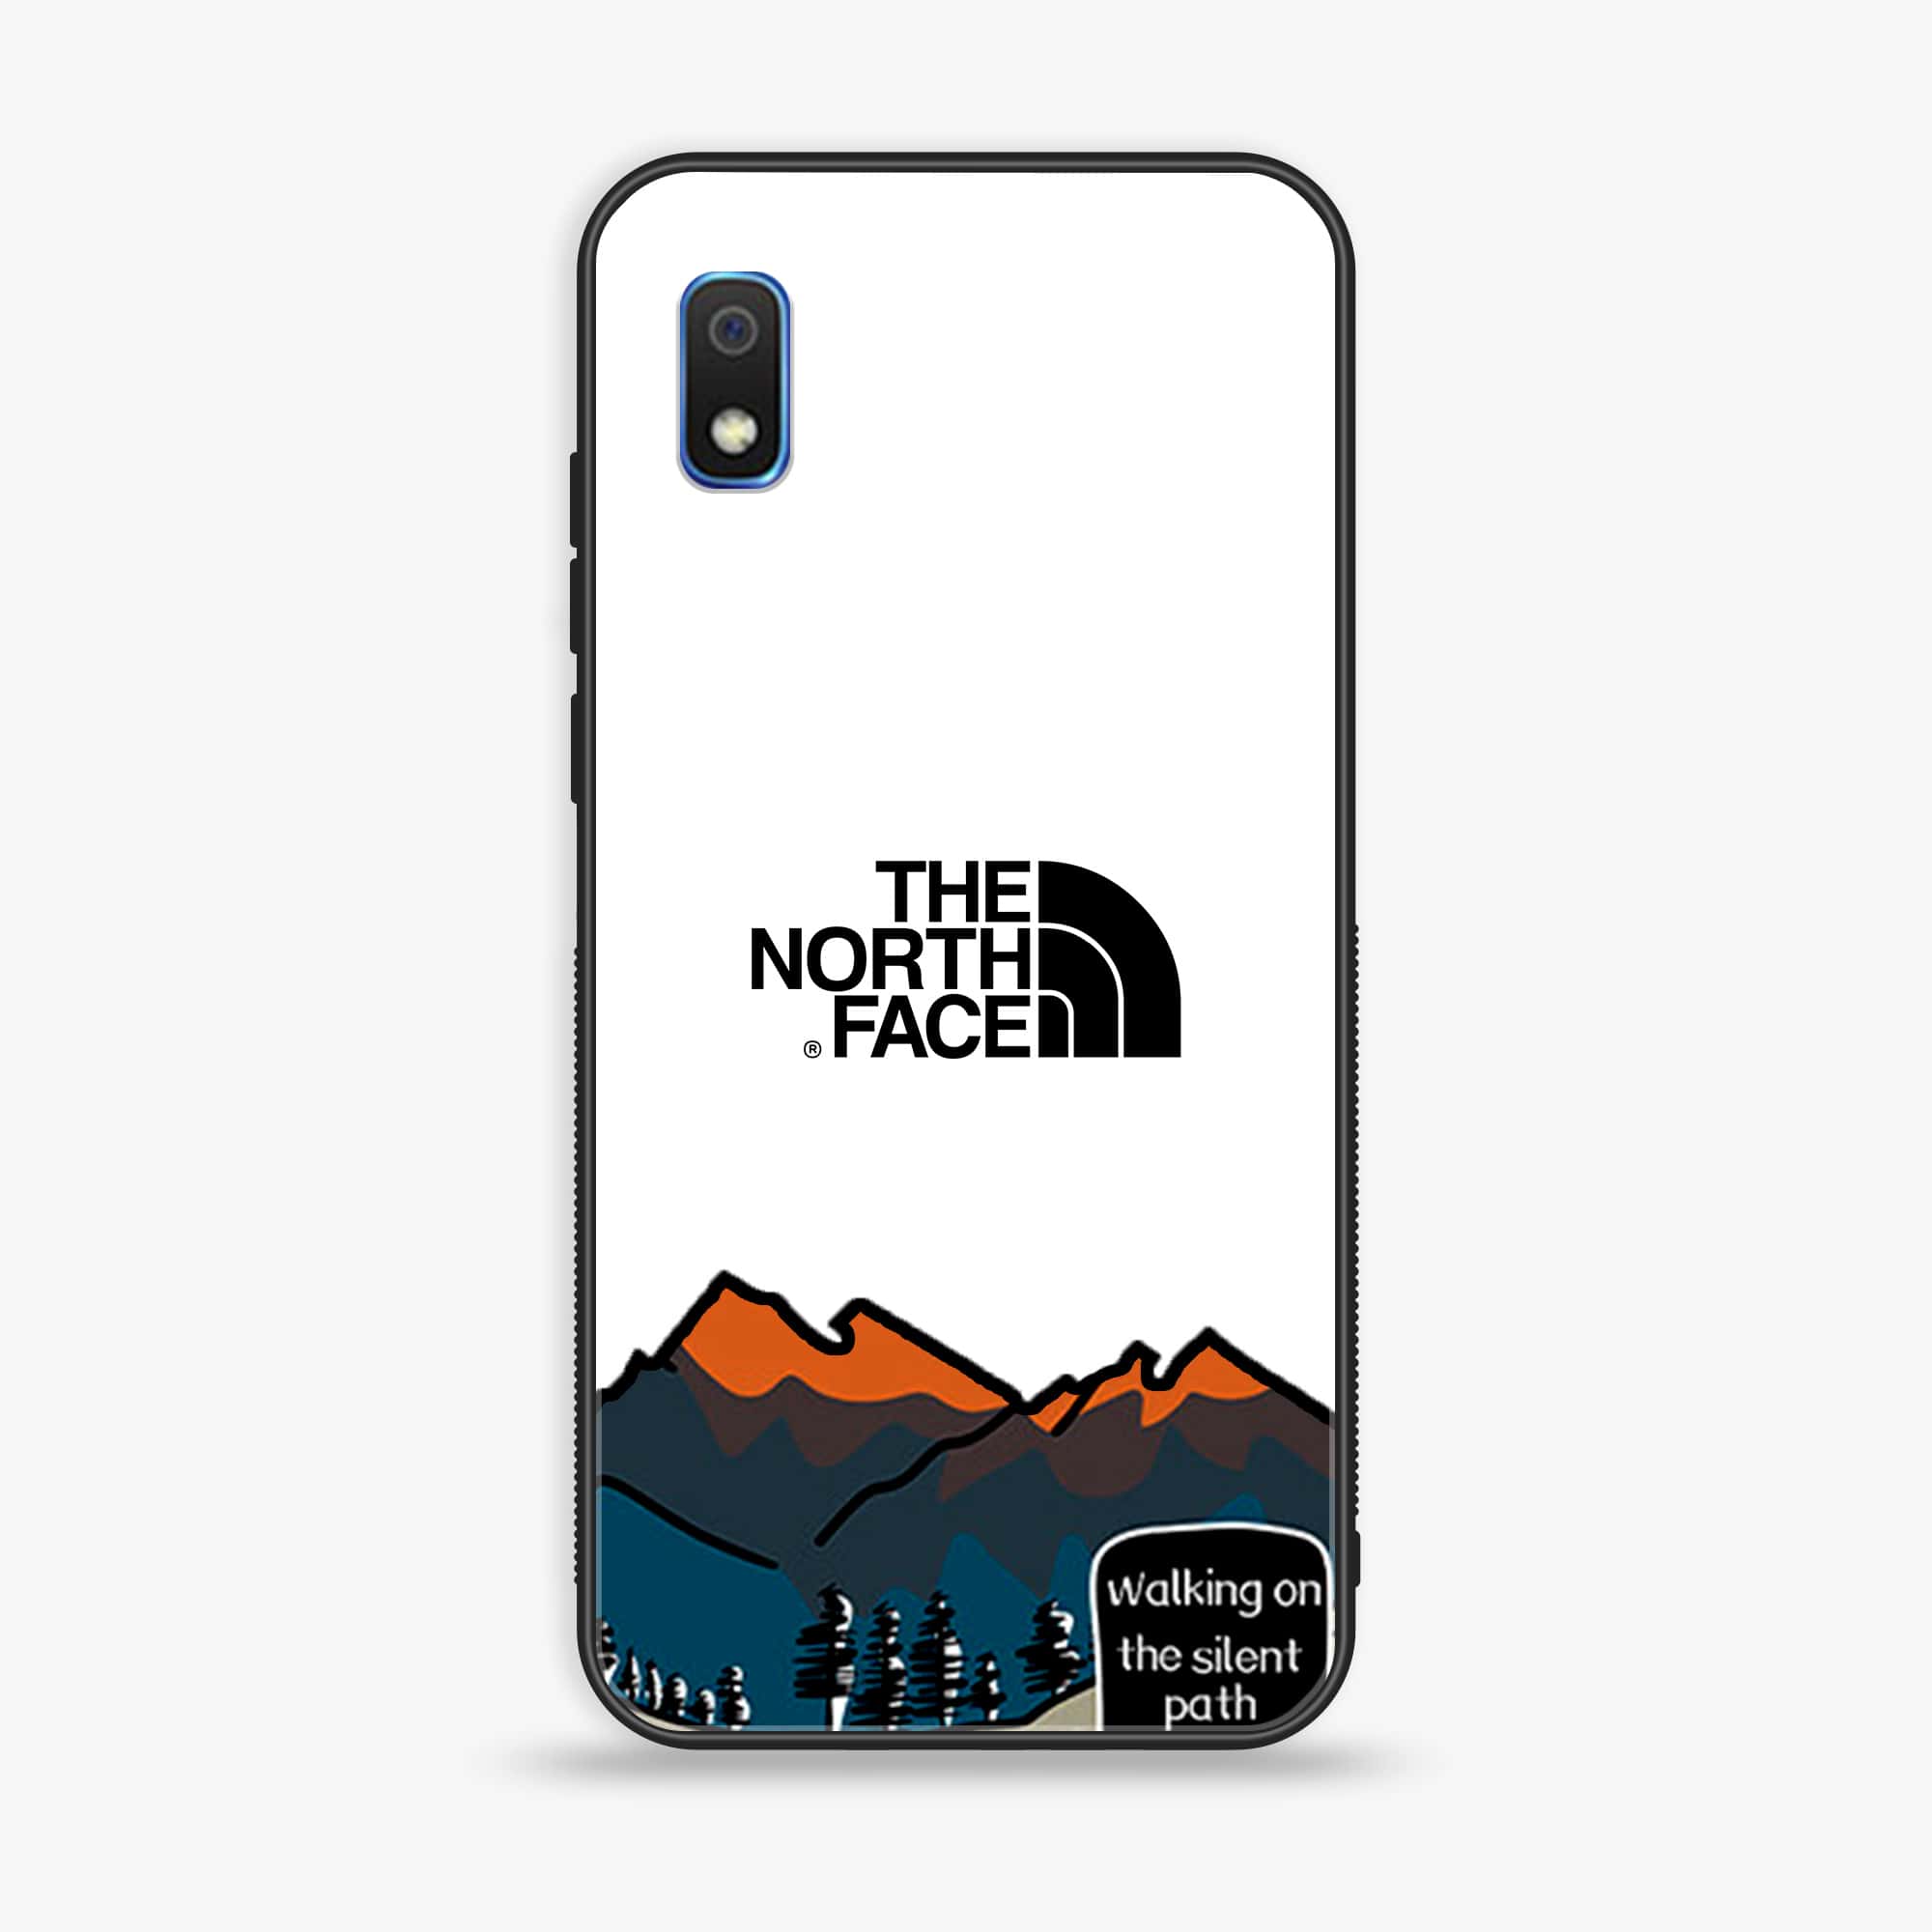 Samsung Galaxy A10 - The North Face Series - Premium Printed Glass soft Bumper shock Proof Case